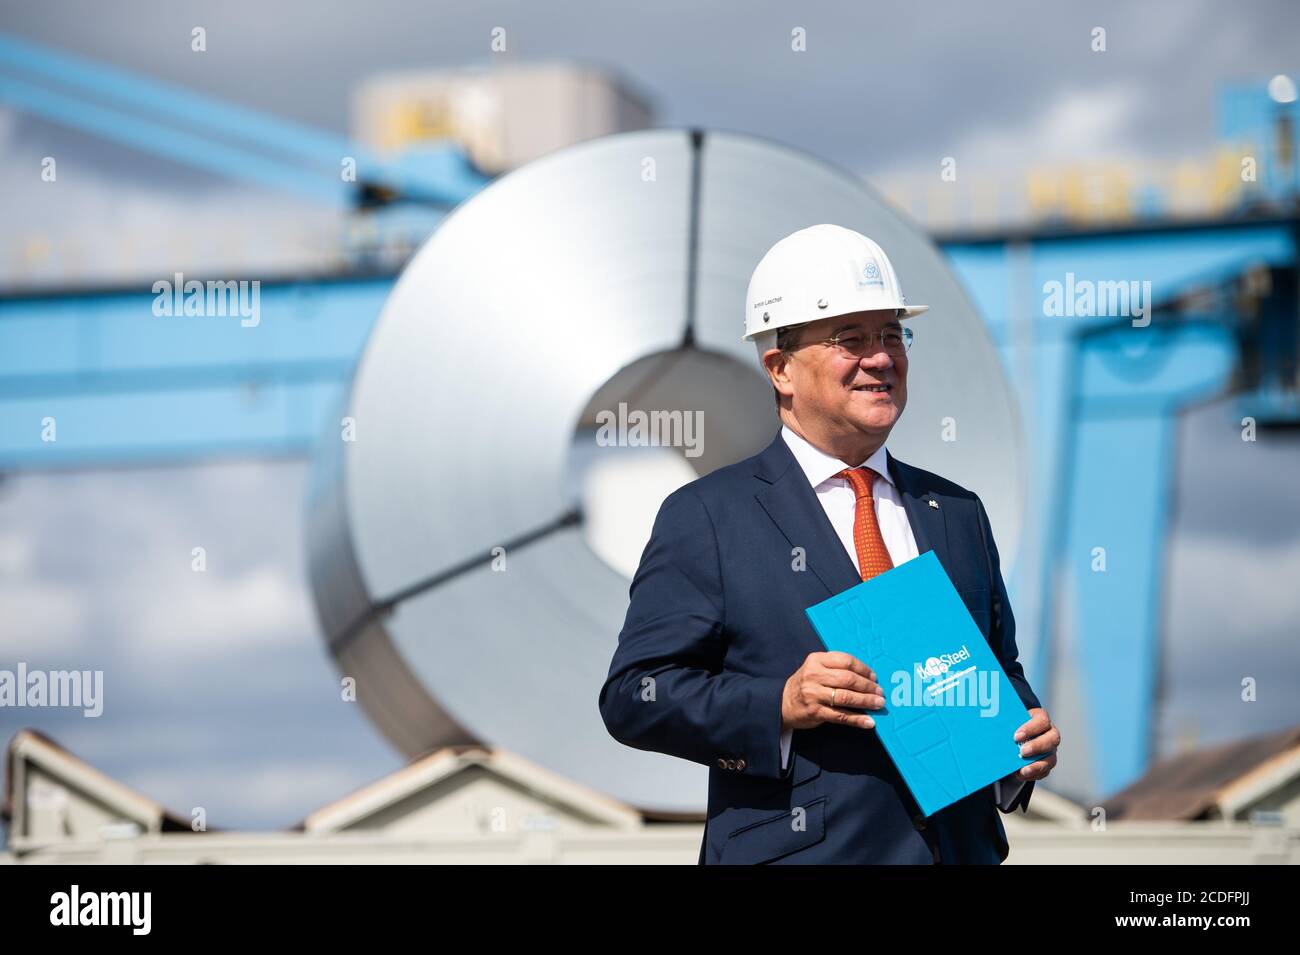 28 August North Rhine Westphalia Duisburg North Rhine Westphalia S Prime Minister Armin Laschet Cdu Visits The Thyssenkrupp Steelworks And Stands In Front Of A Roll Of Sheet Steel Wearing A Protective Helmet Thyssenkrupp